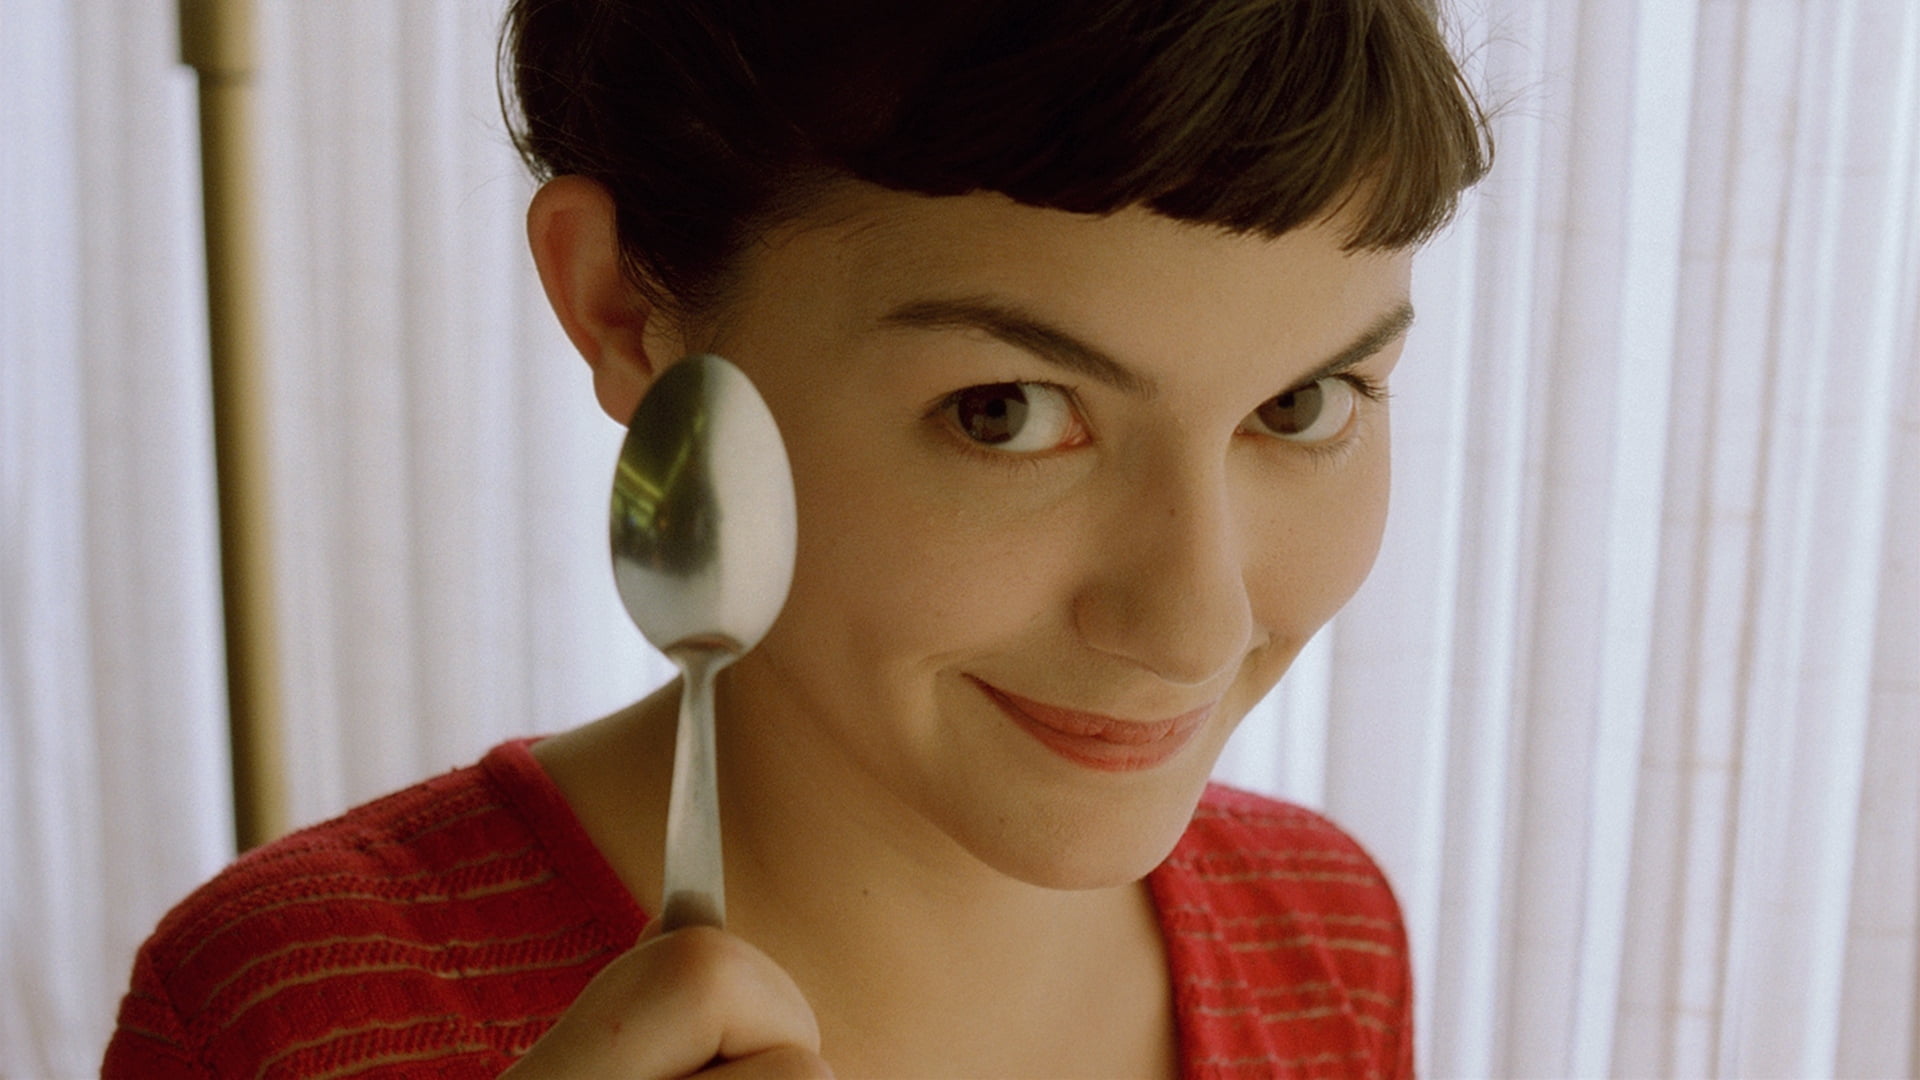 Free Download Hd Wallpaper Stainless Steel Spoon Amelie Audrey Tautou Actress Amelie 